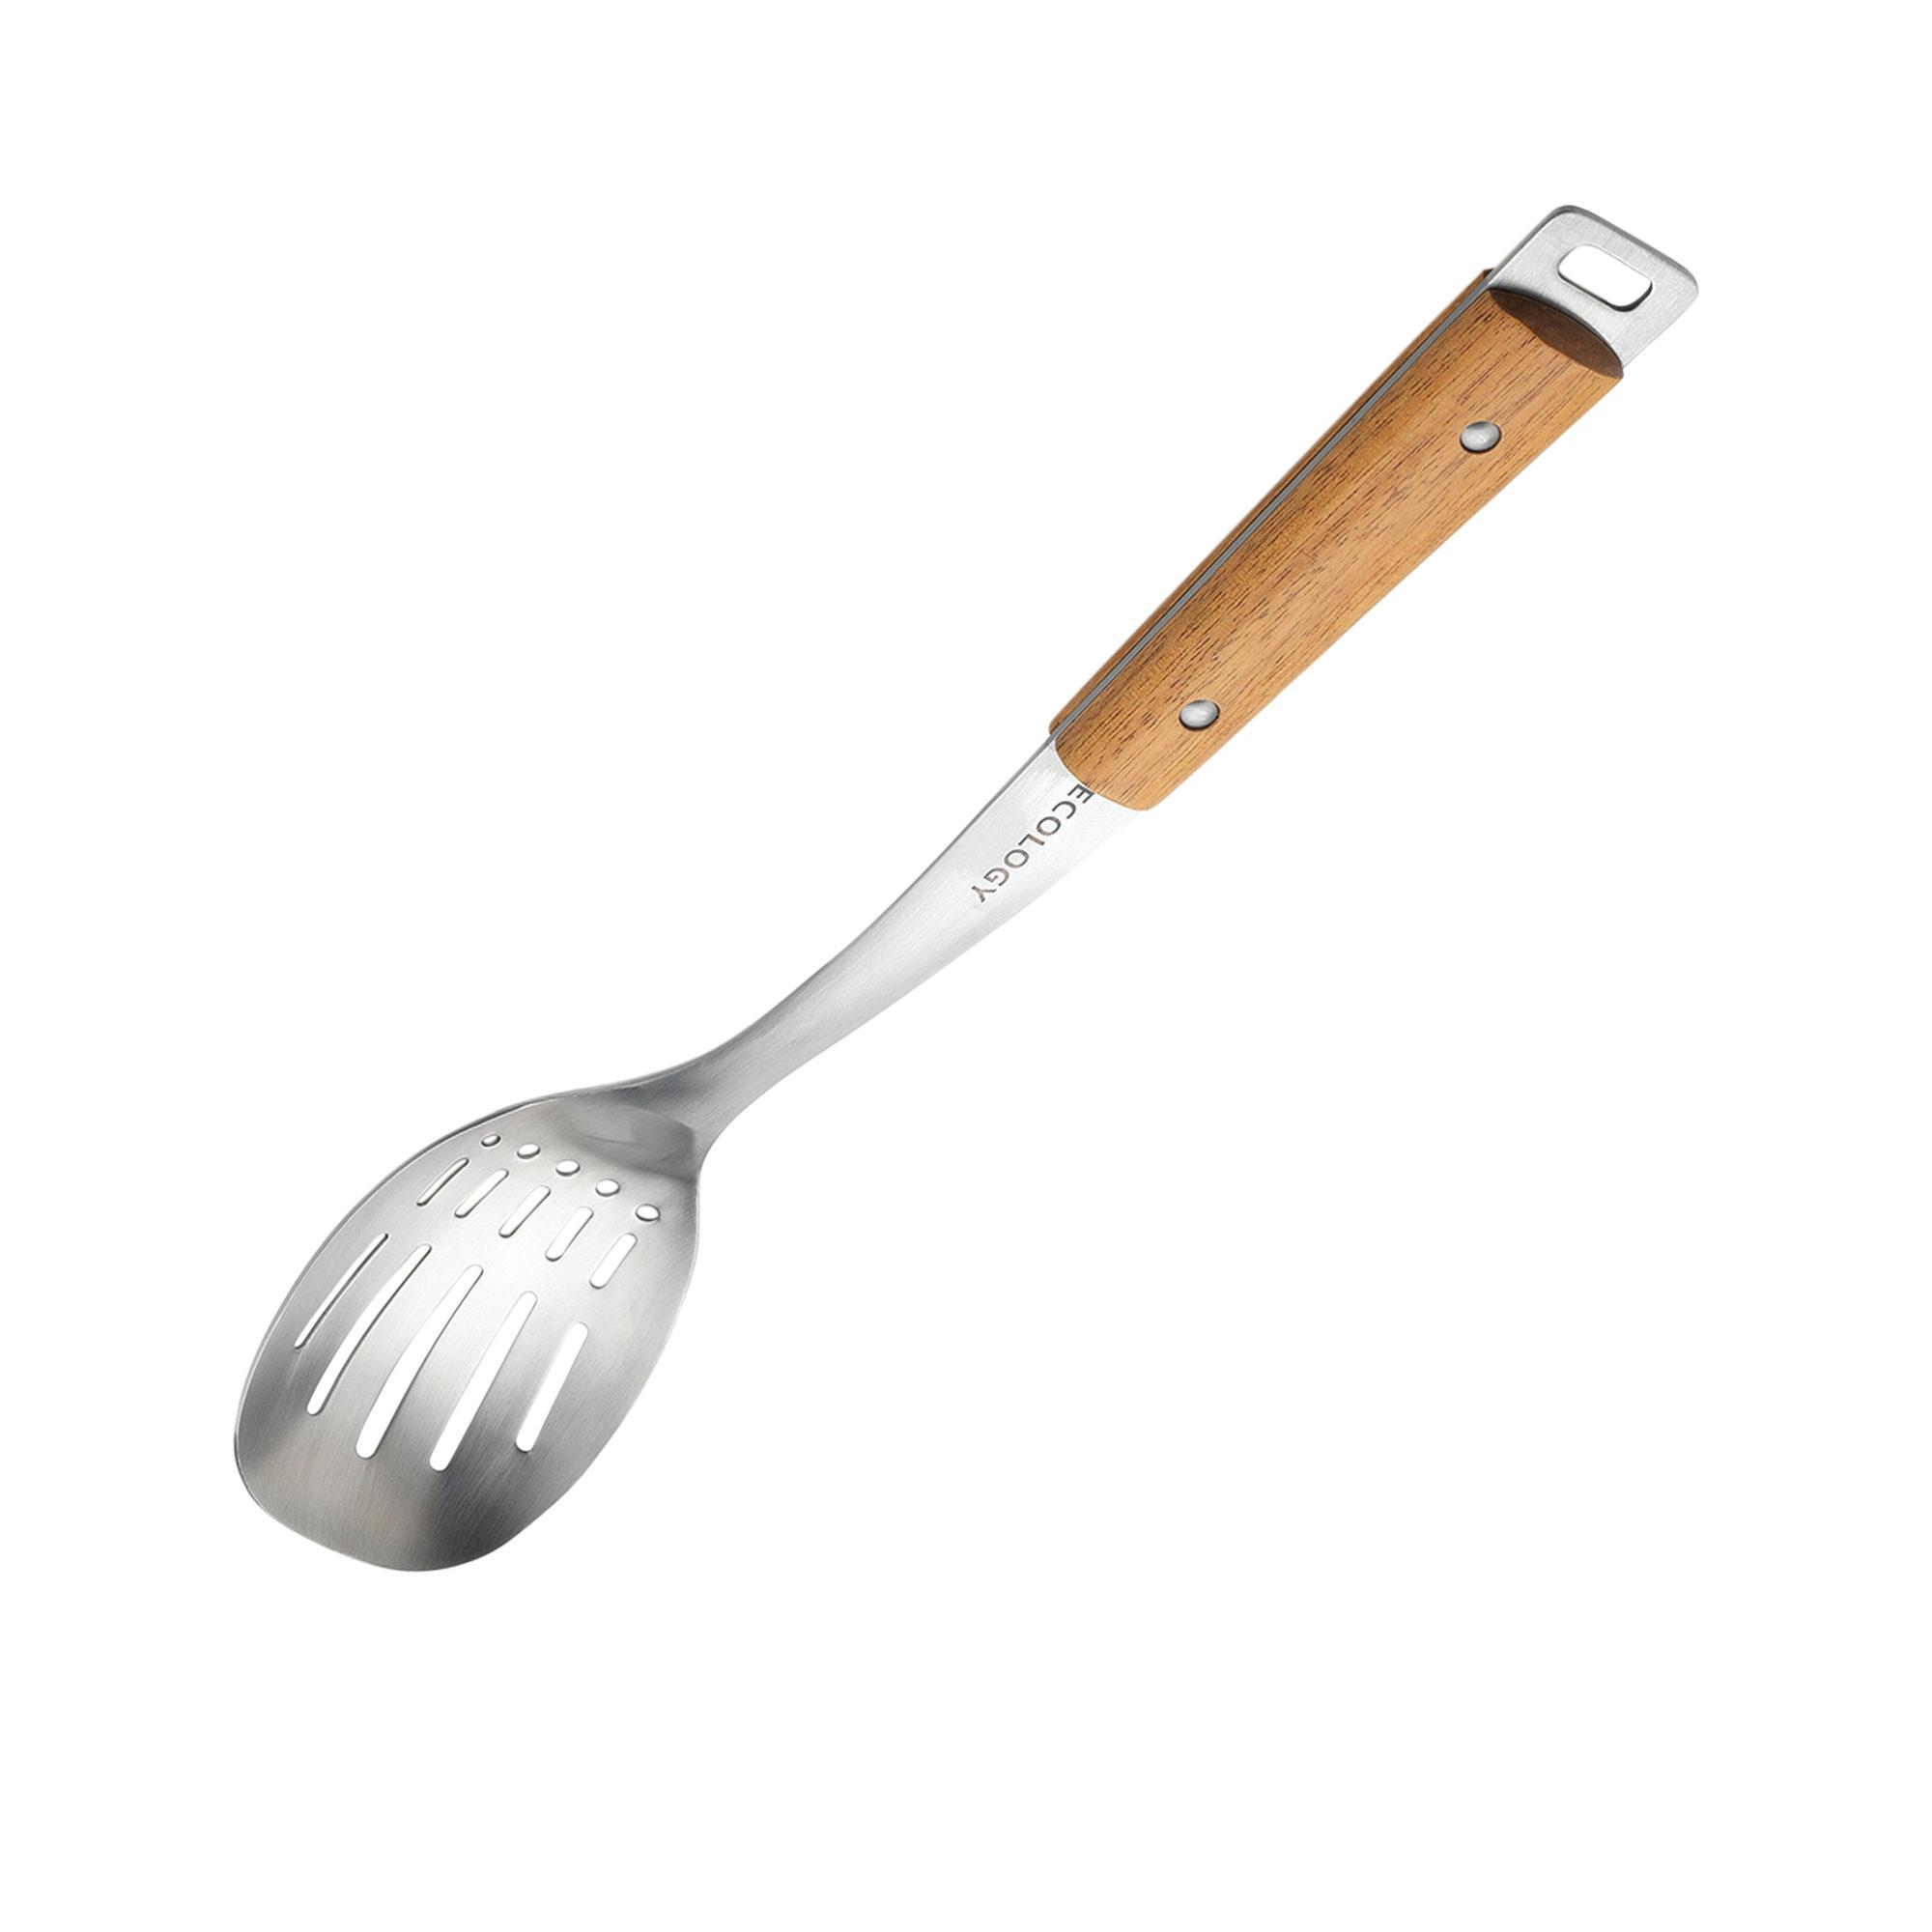 Ecology Acacia Provisions Slotted Spoon Image 1